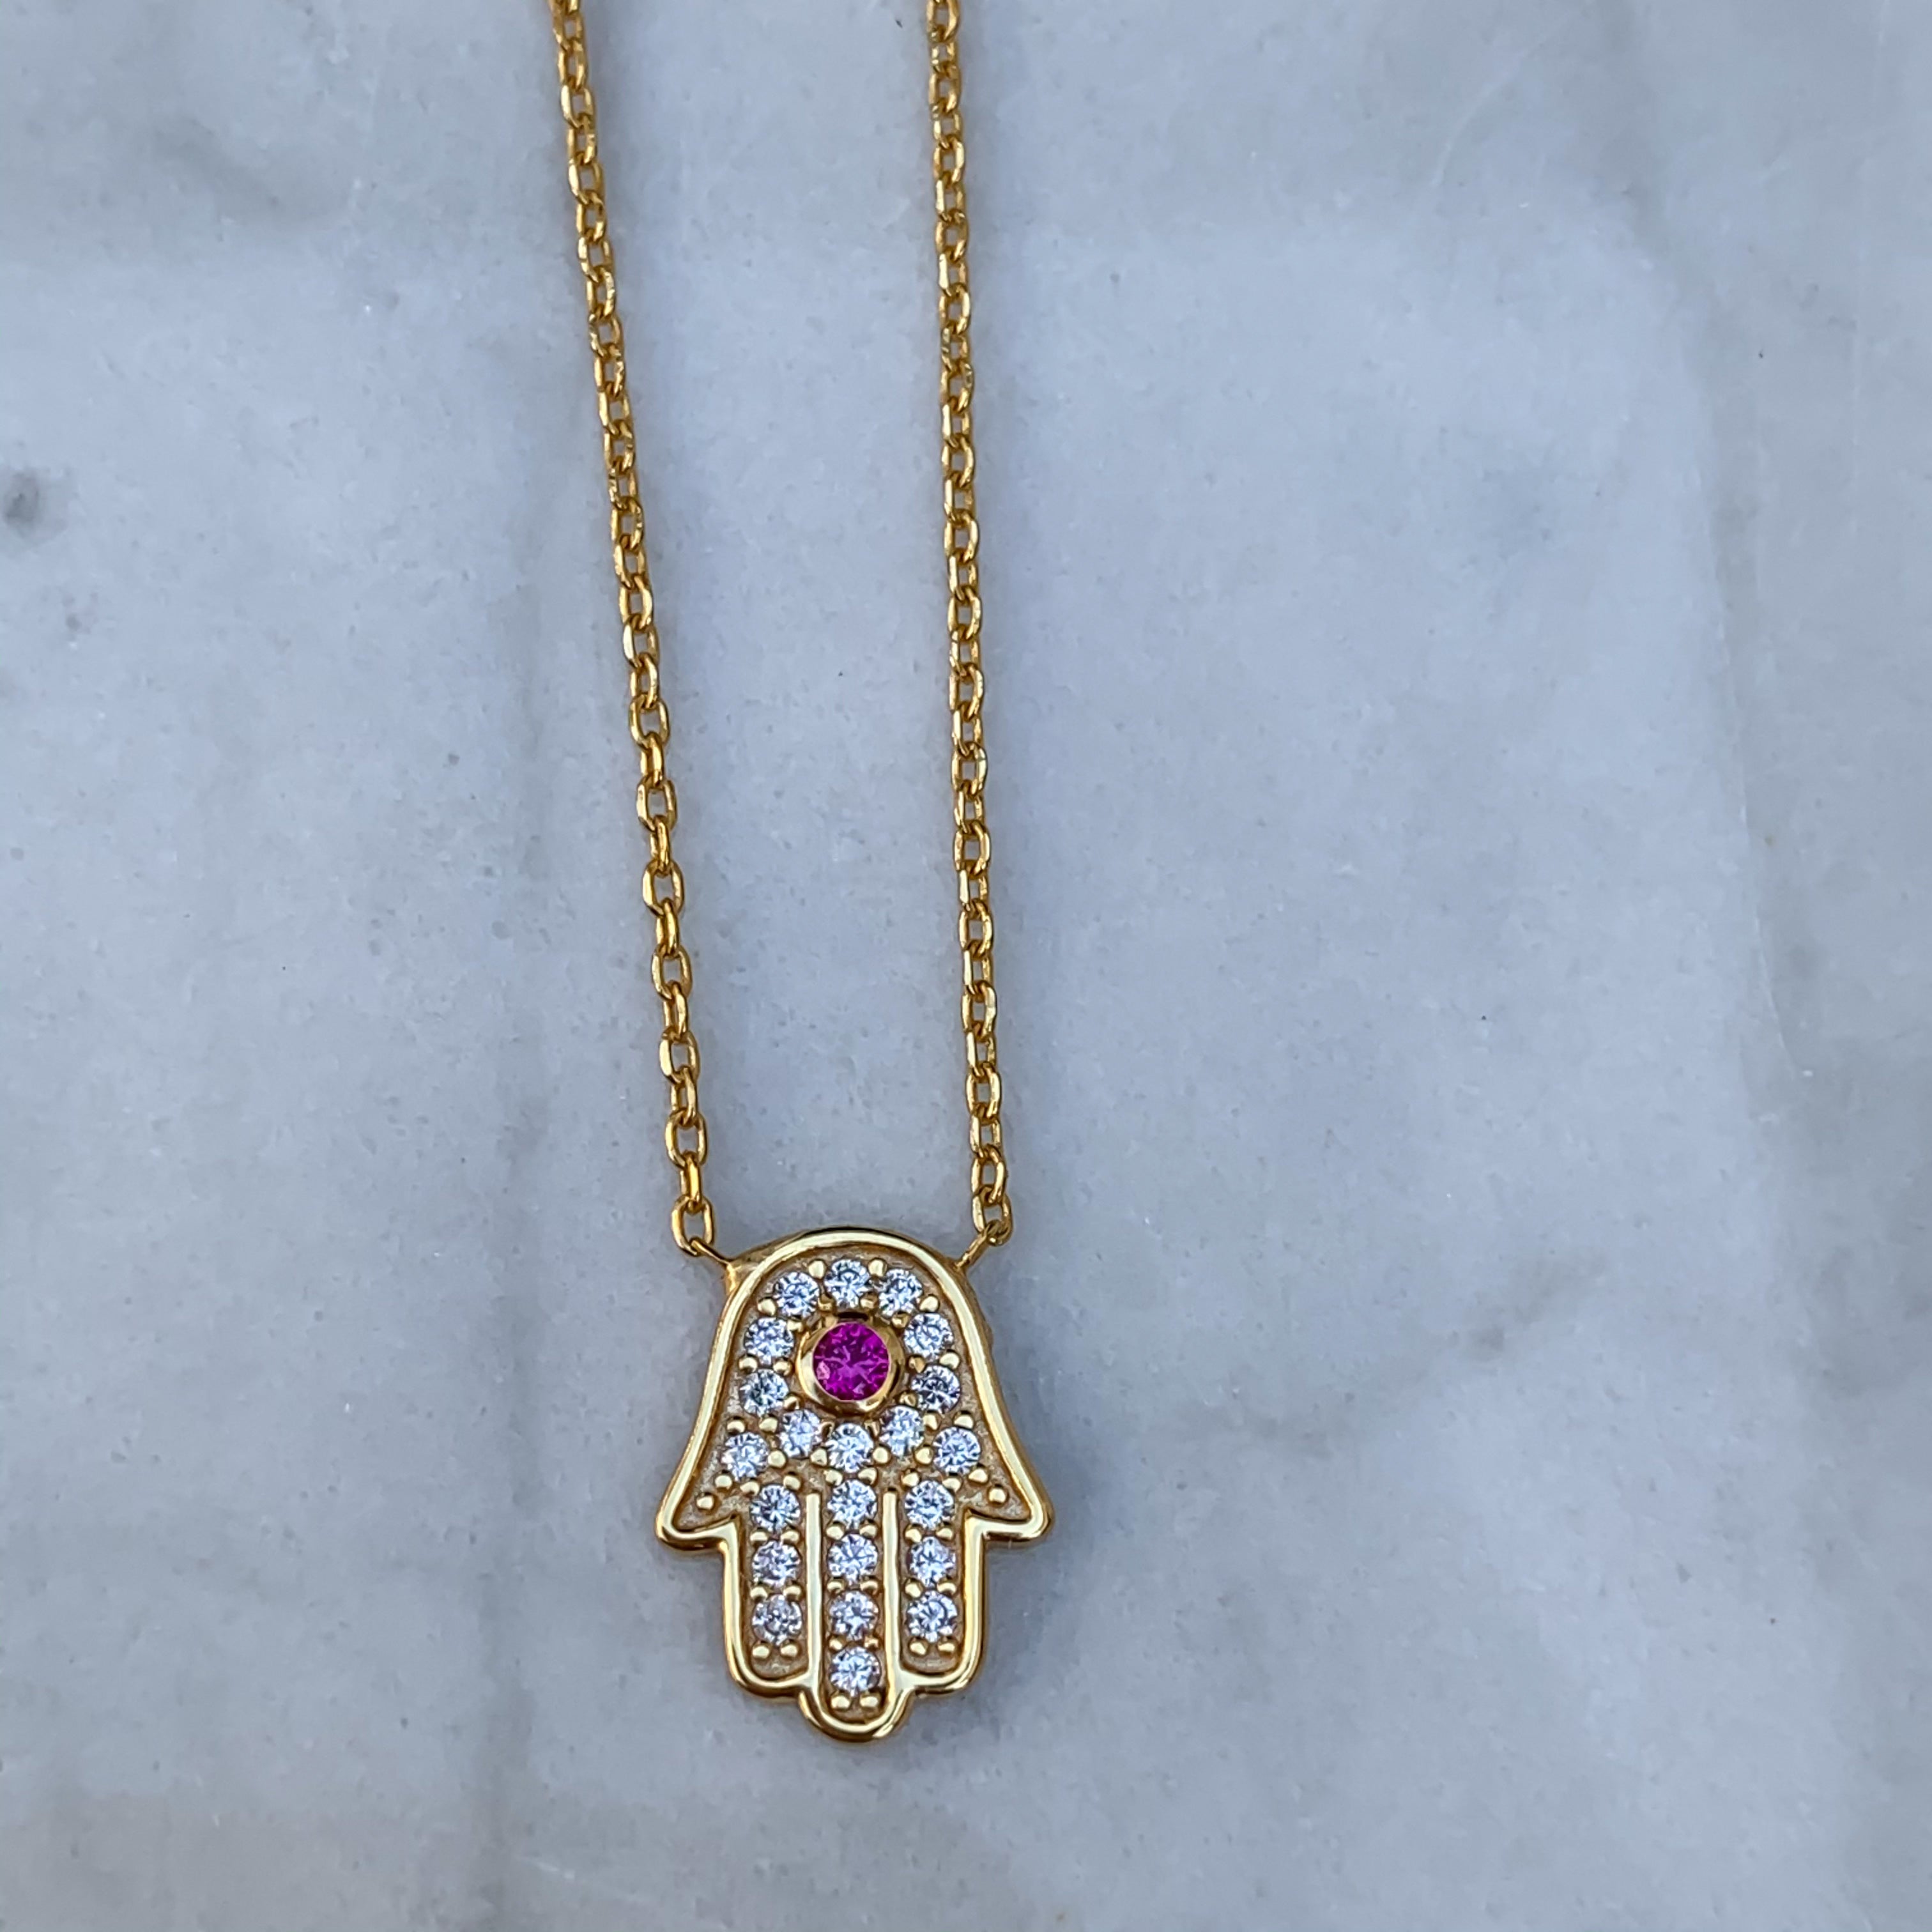 Sterling silver gold plated dainty hamsa necklace